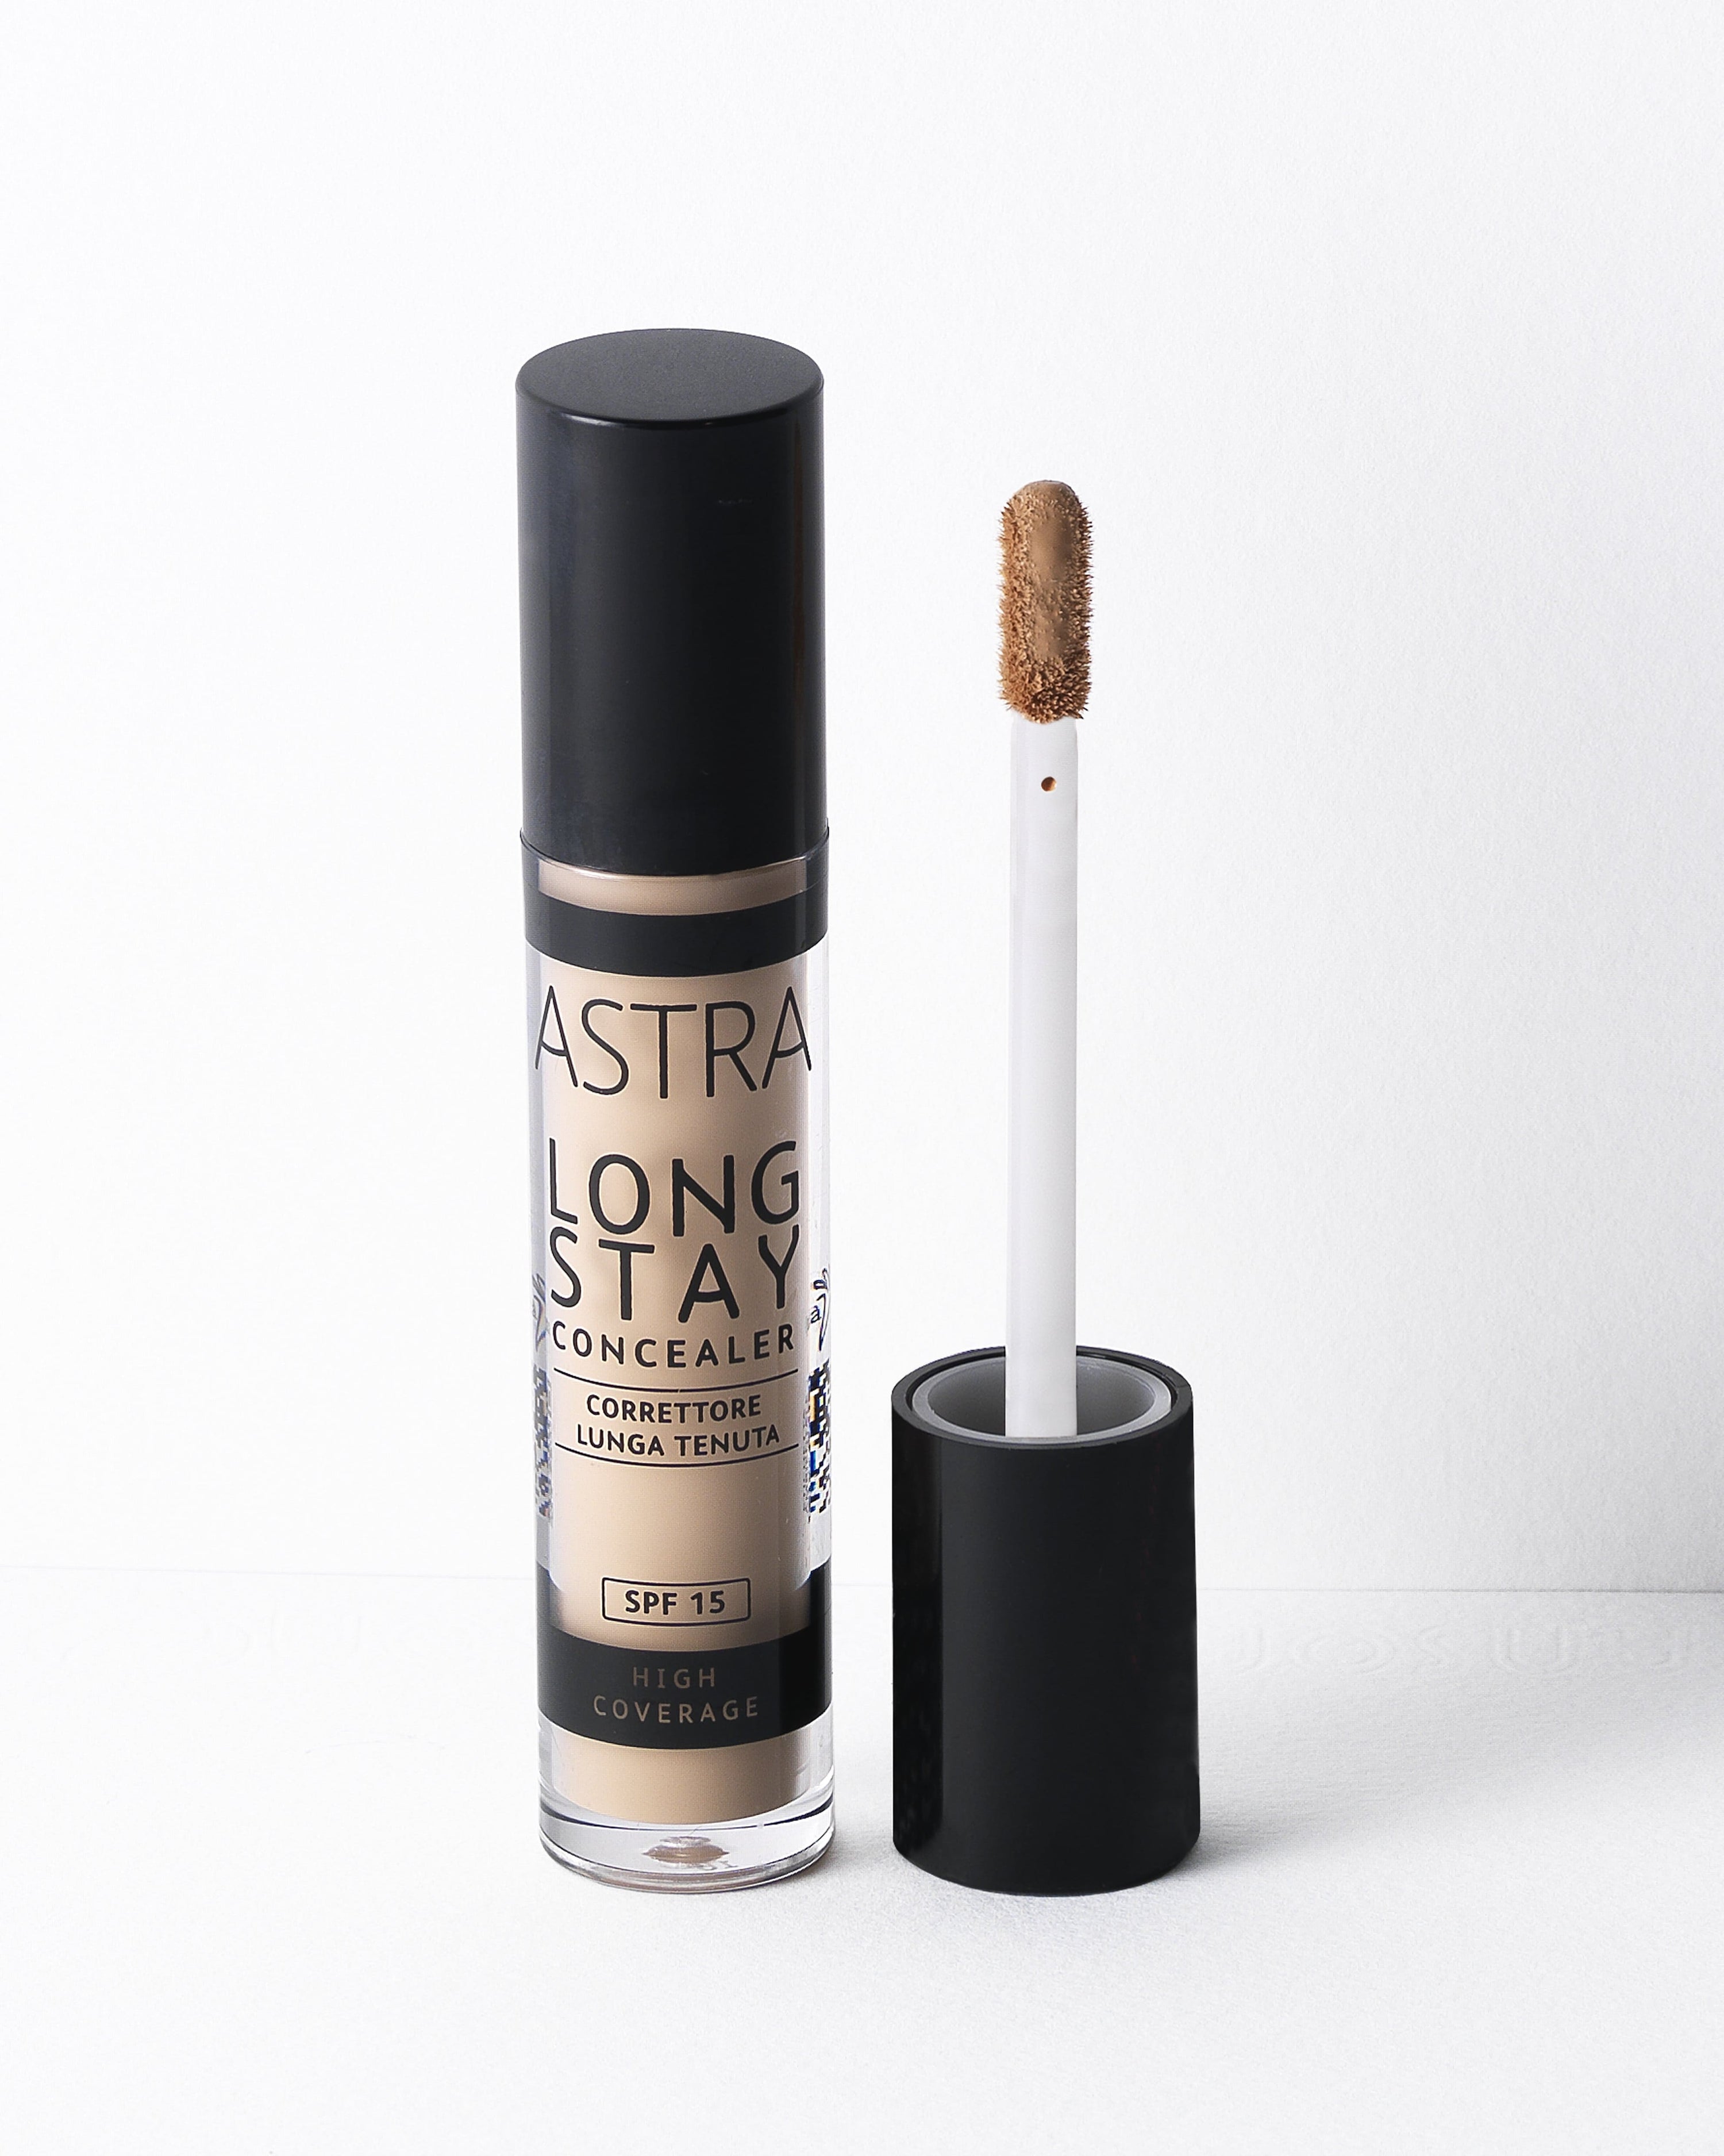 LONG STAY CONCEALER - Correttore Lunga Tenuta - 04W - Sand - Astra Make-Up